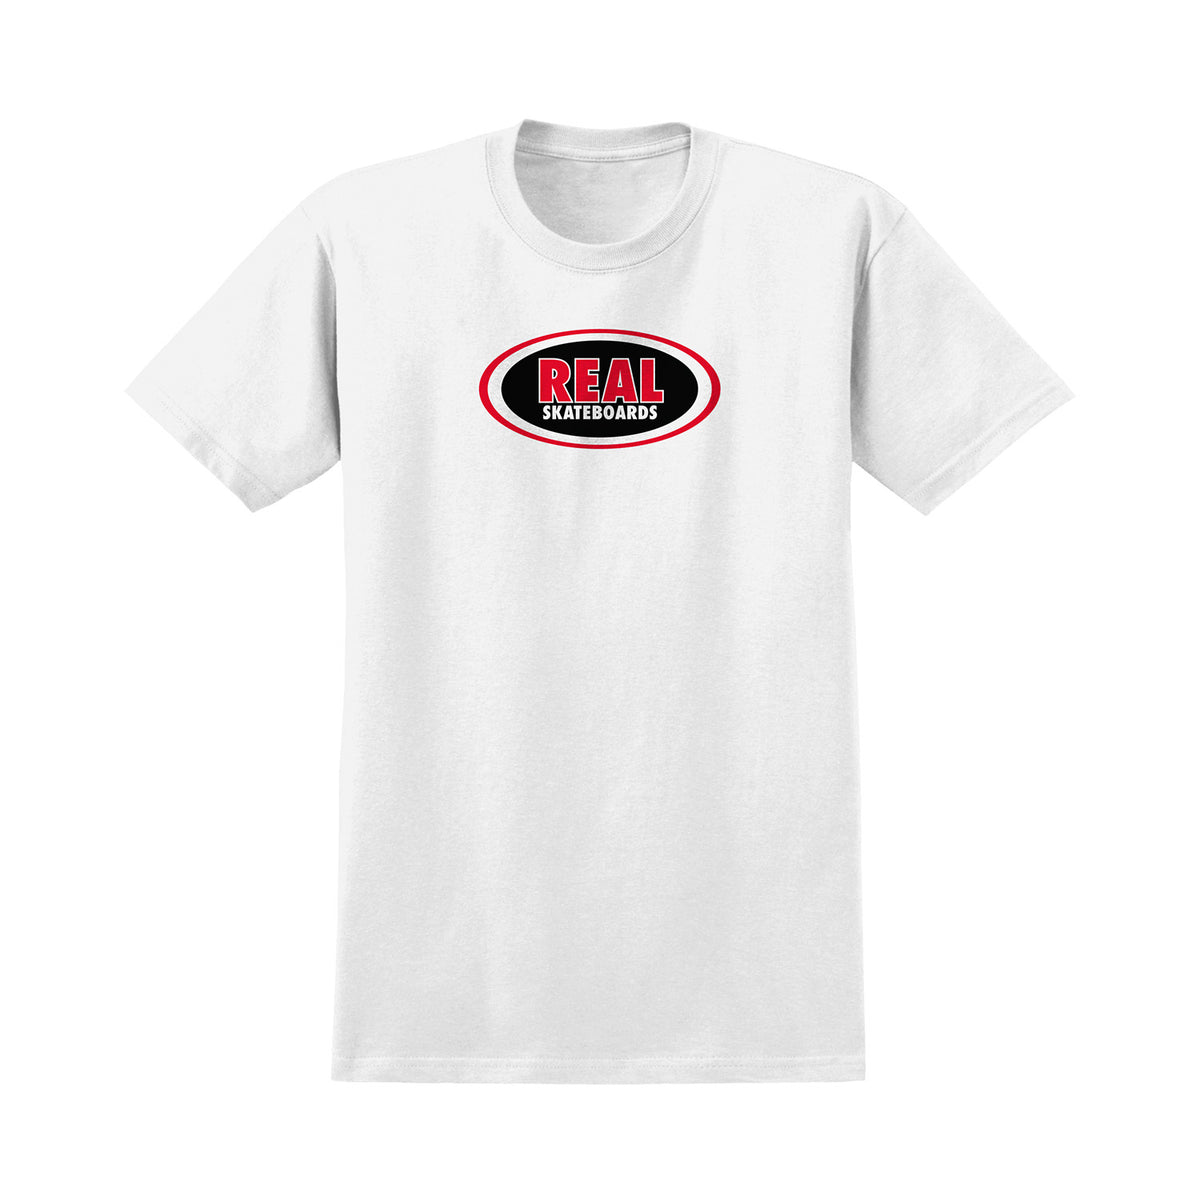 Real Oval T-Shirt